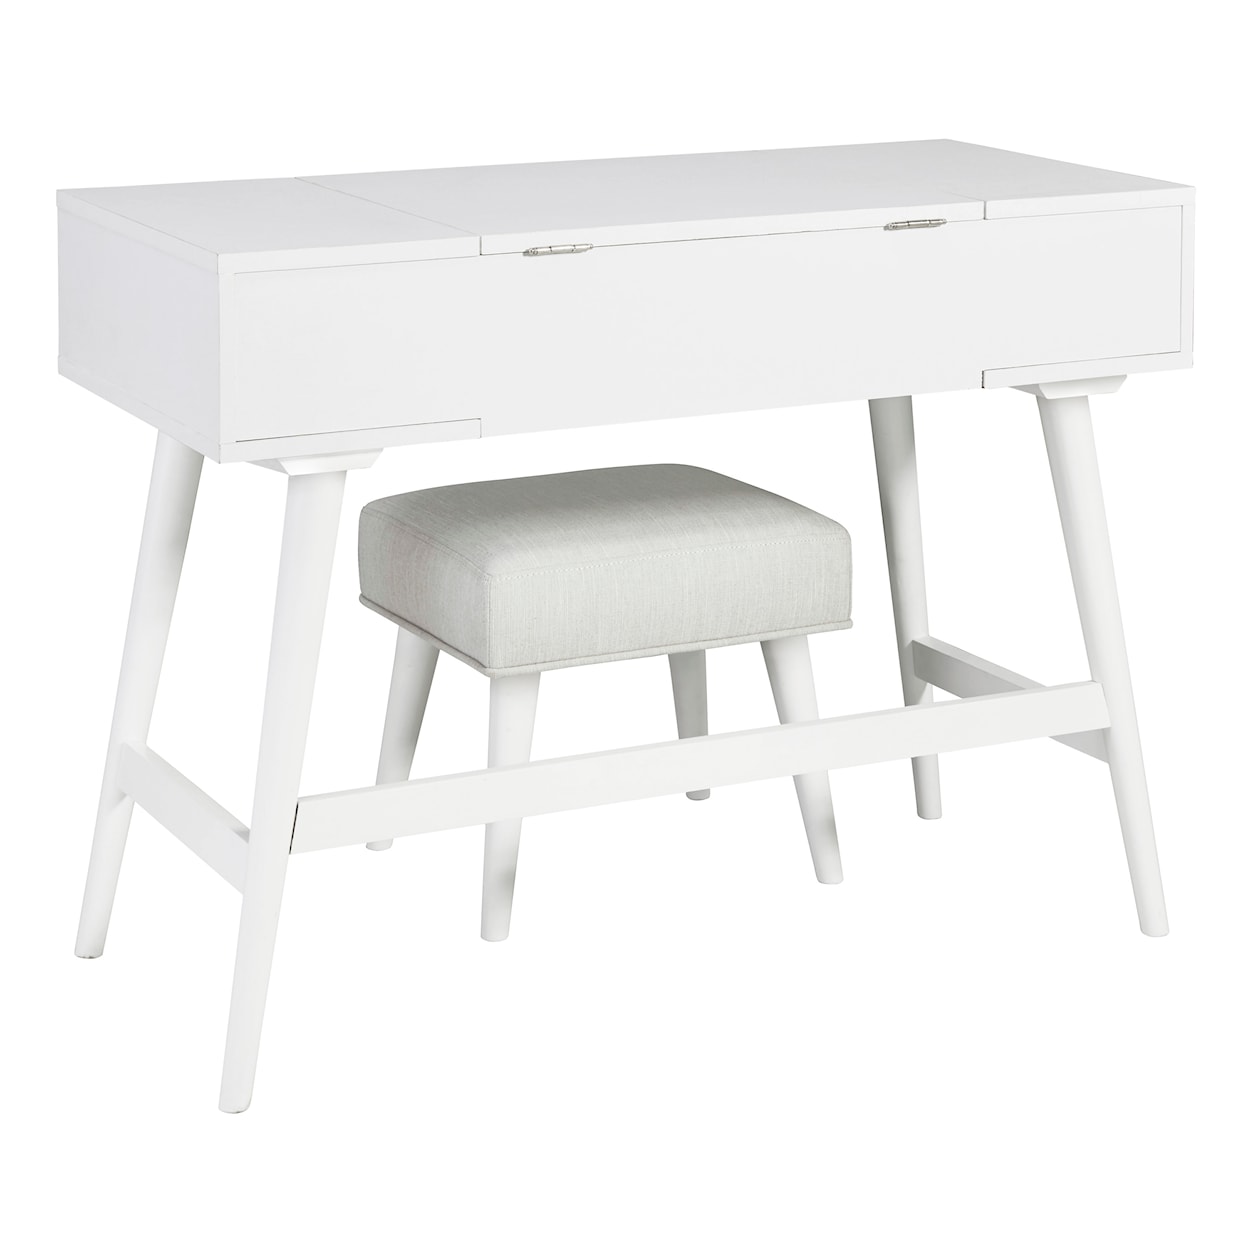 Signature Design by Ashley Thadamere Vanity with Stool